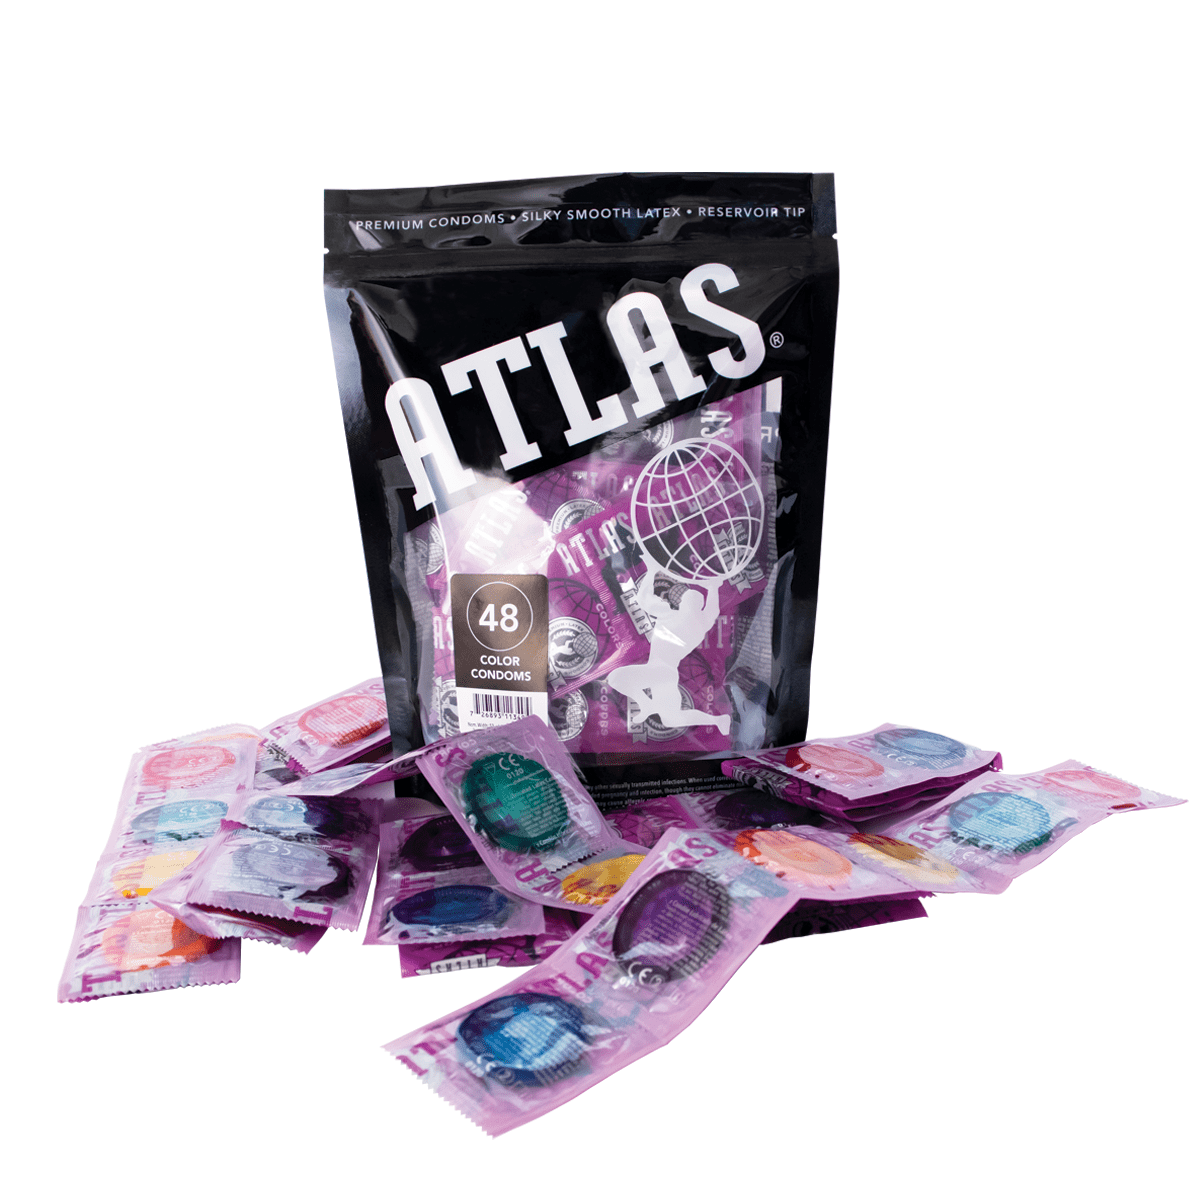 TRUSTEX NON-LUBRICATED COLOR CONDOMS 75 PACK FREE SHIPPING 